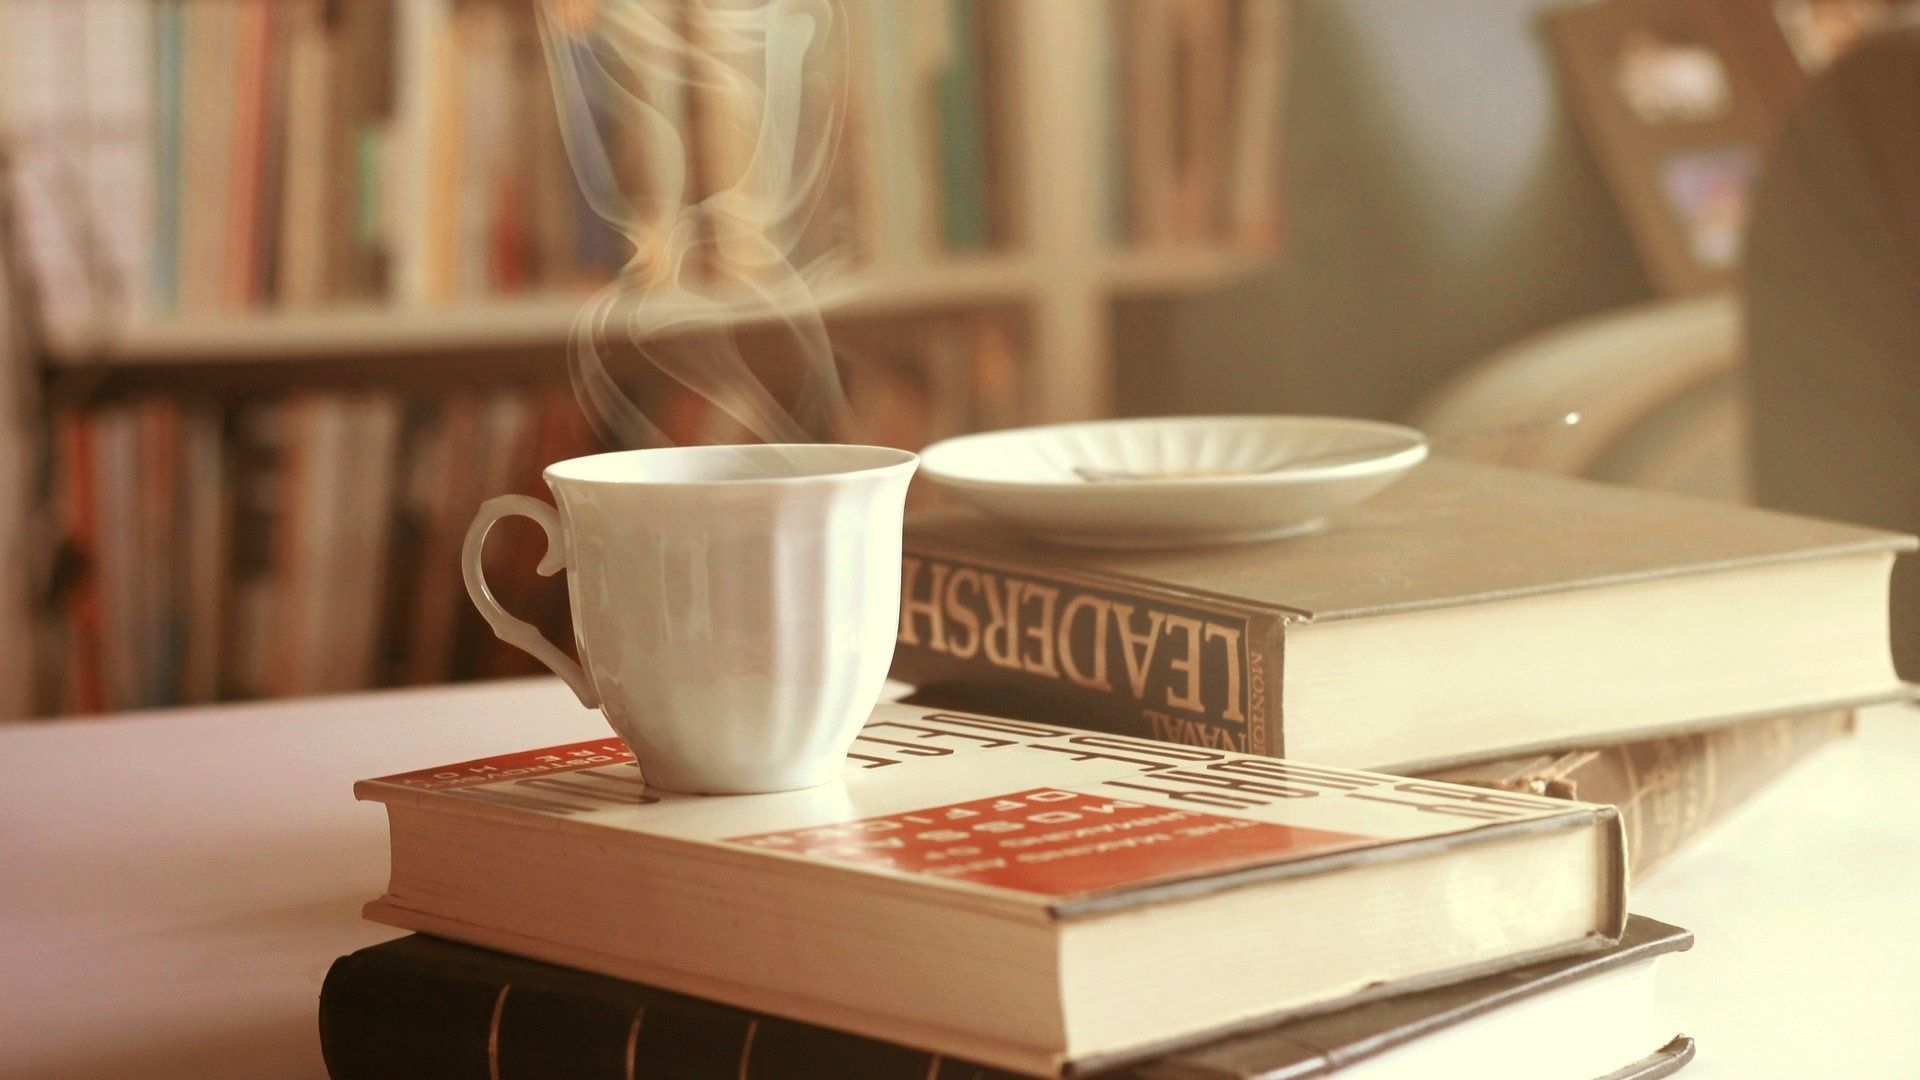 A cup of coffee sitting on top books - Books, coffee